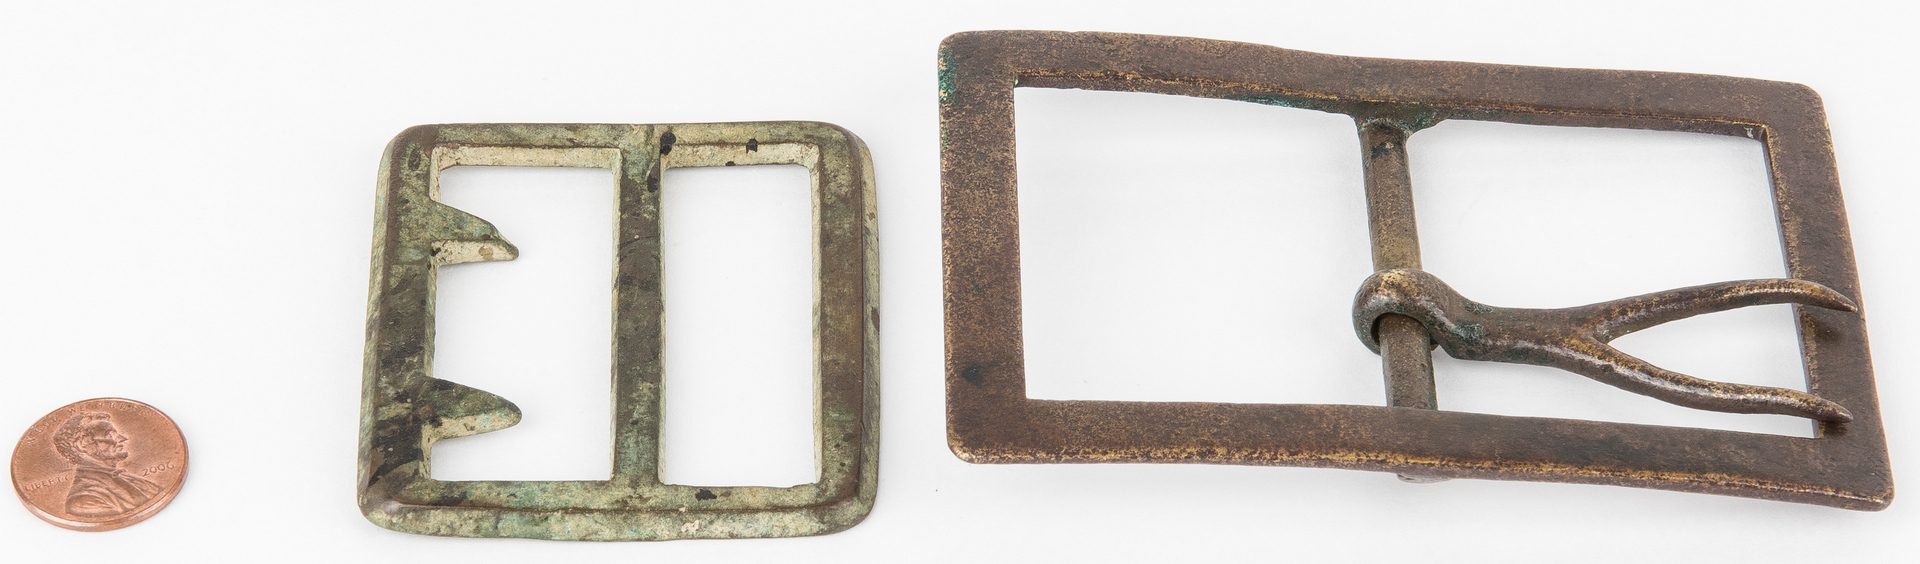 Lot 273: 2 Confederate Frame Buckles, incl. Forked Tongue, Beveled Edge